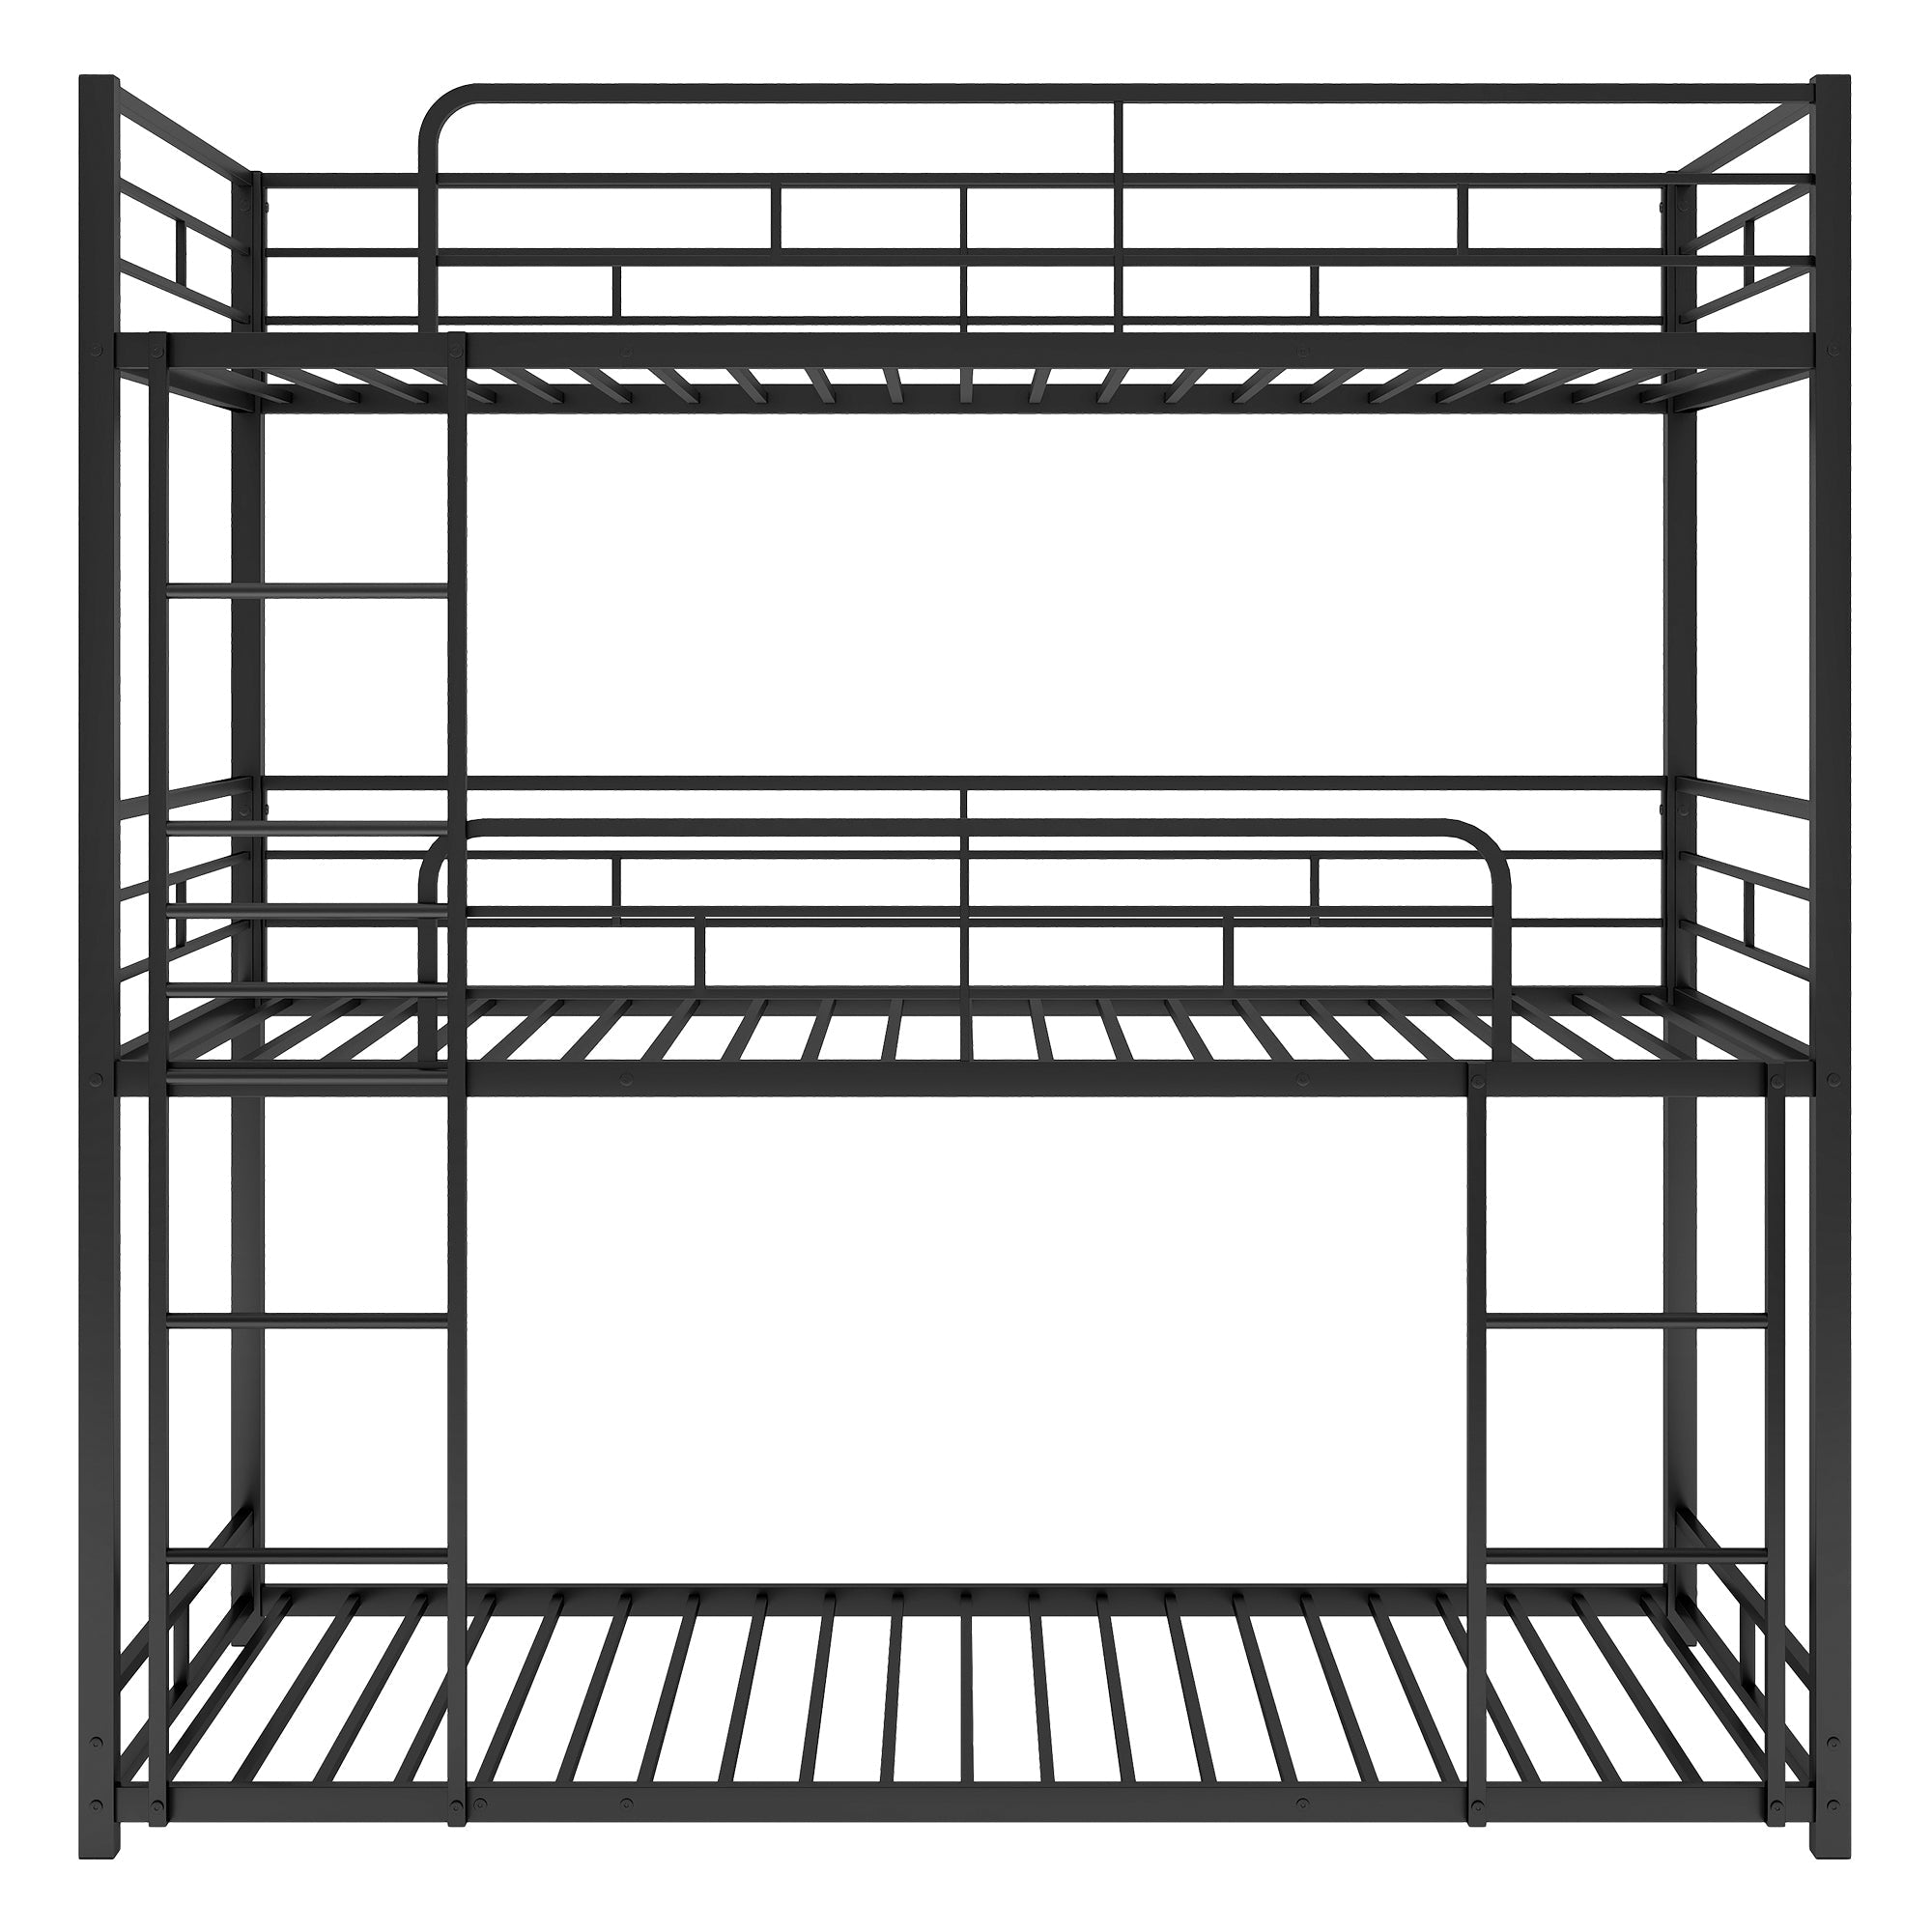 Metal Twin Size Triple Bunk Bed | Black | Space-Saving Solution | Sturdy Construction